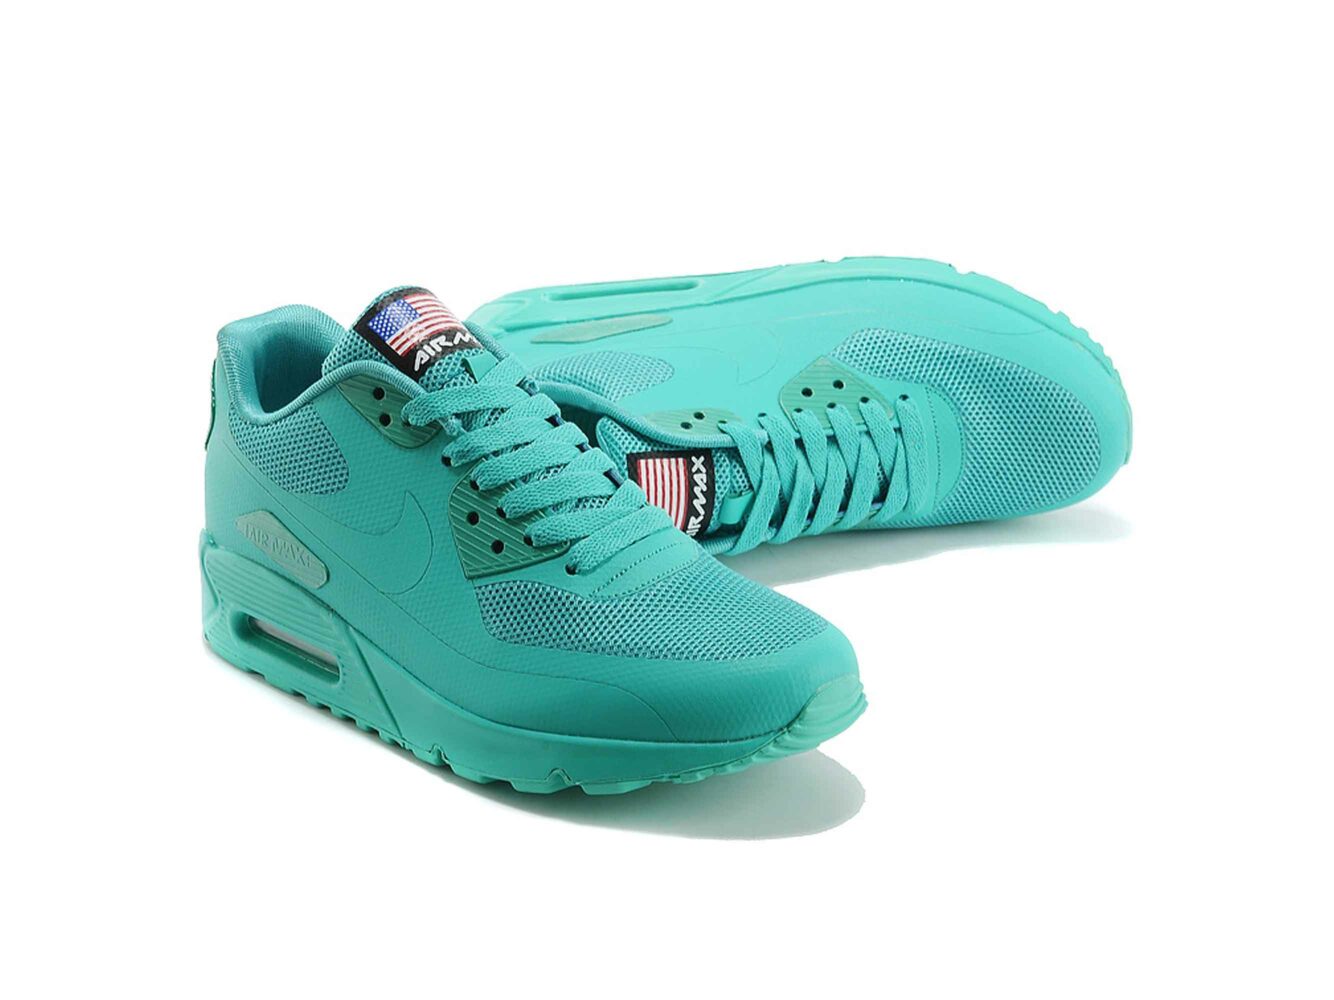 Nike Air Max 90 Hyperfuse Independence Day 2013 Turquoise Купить